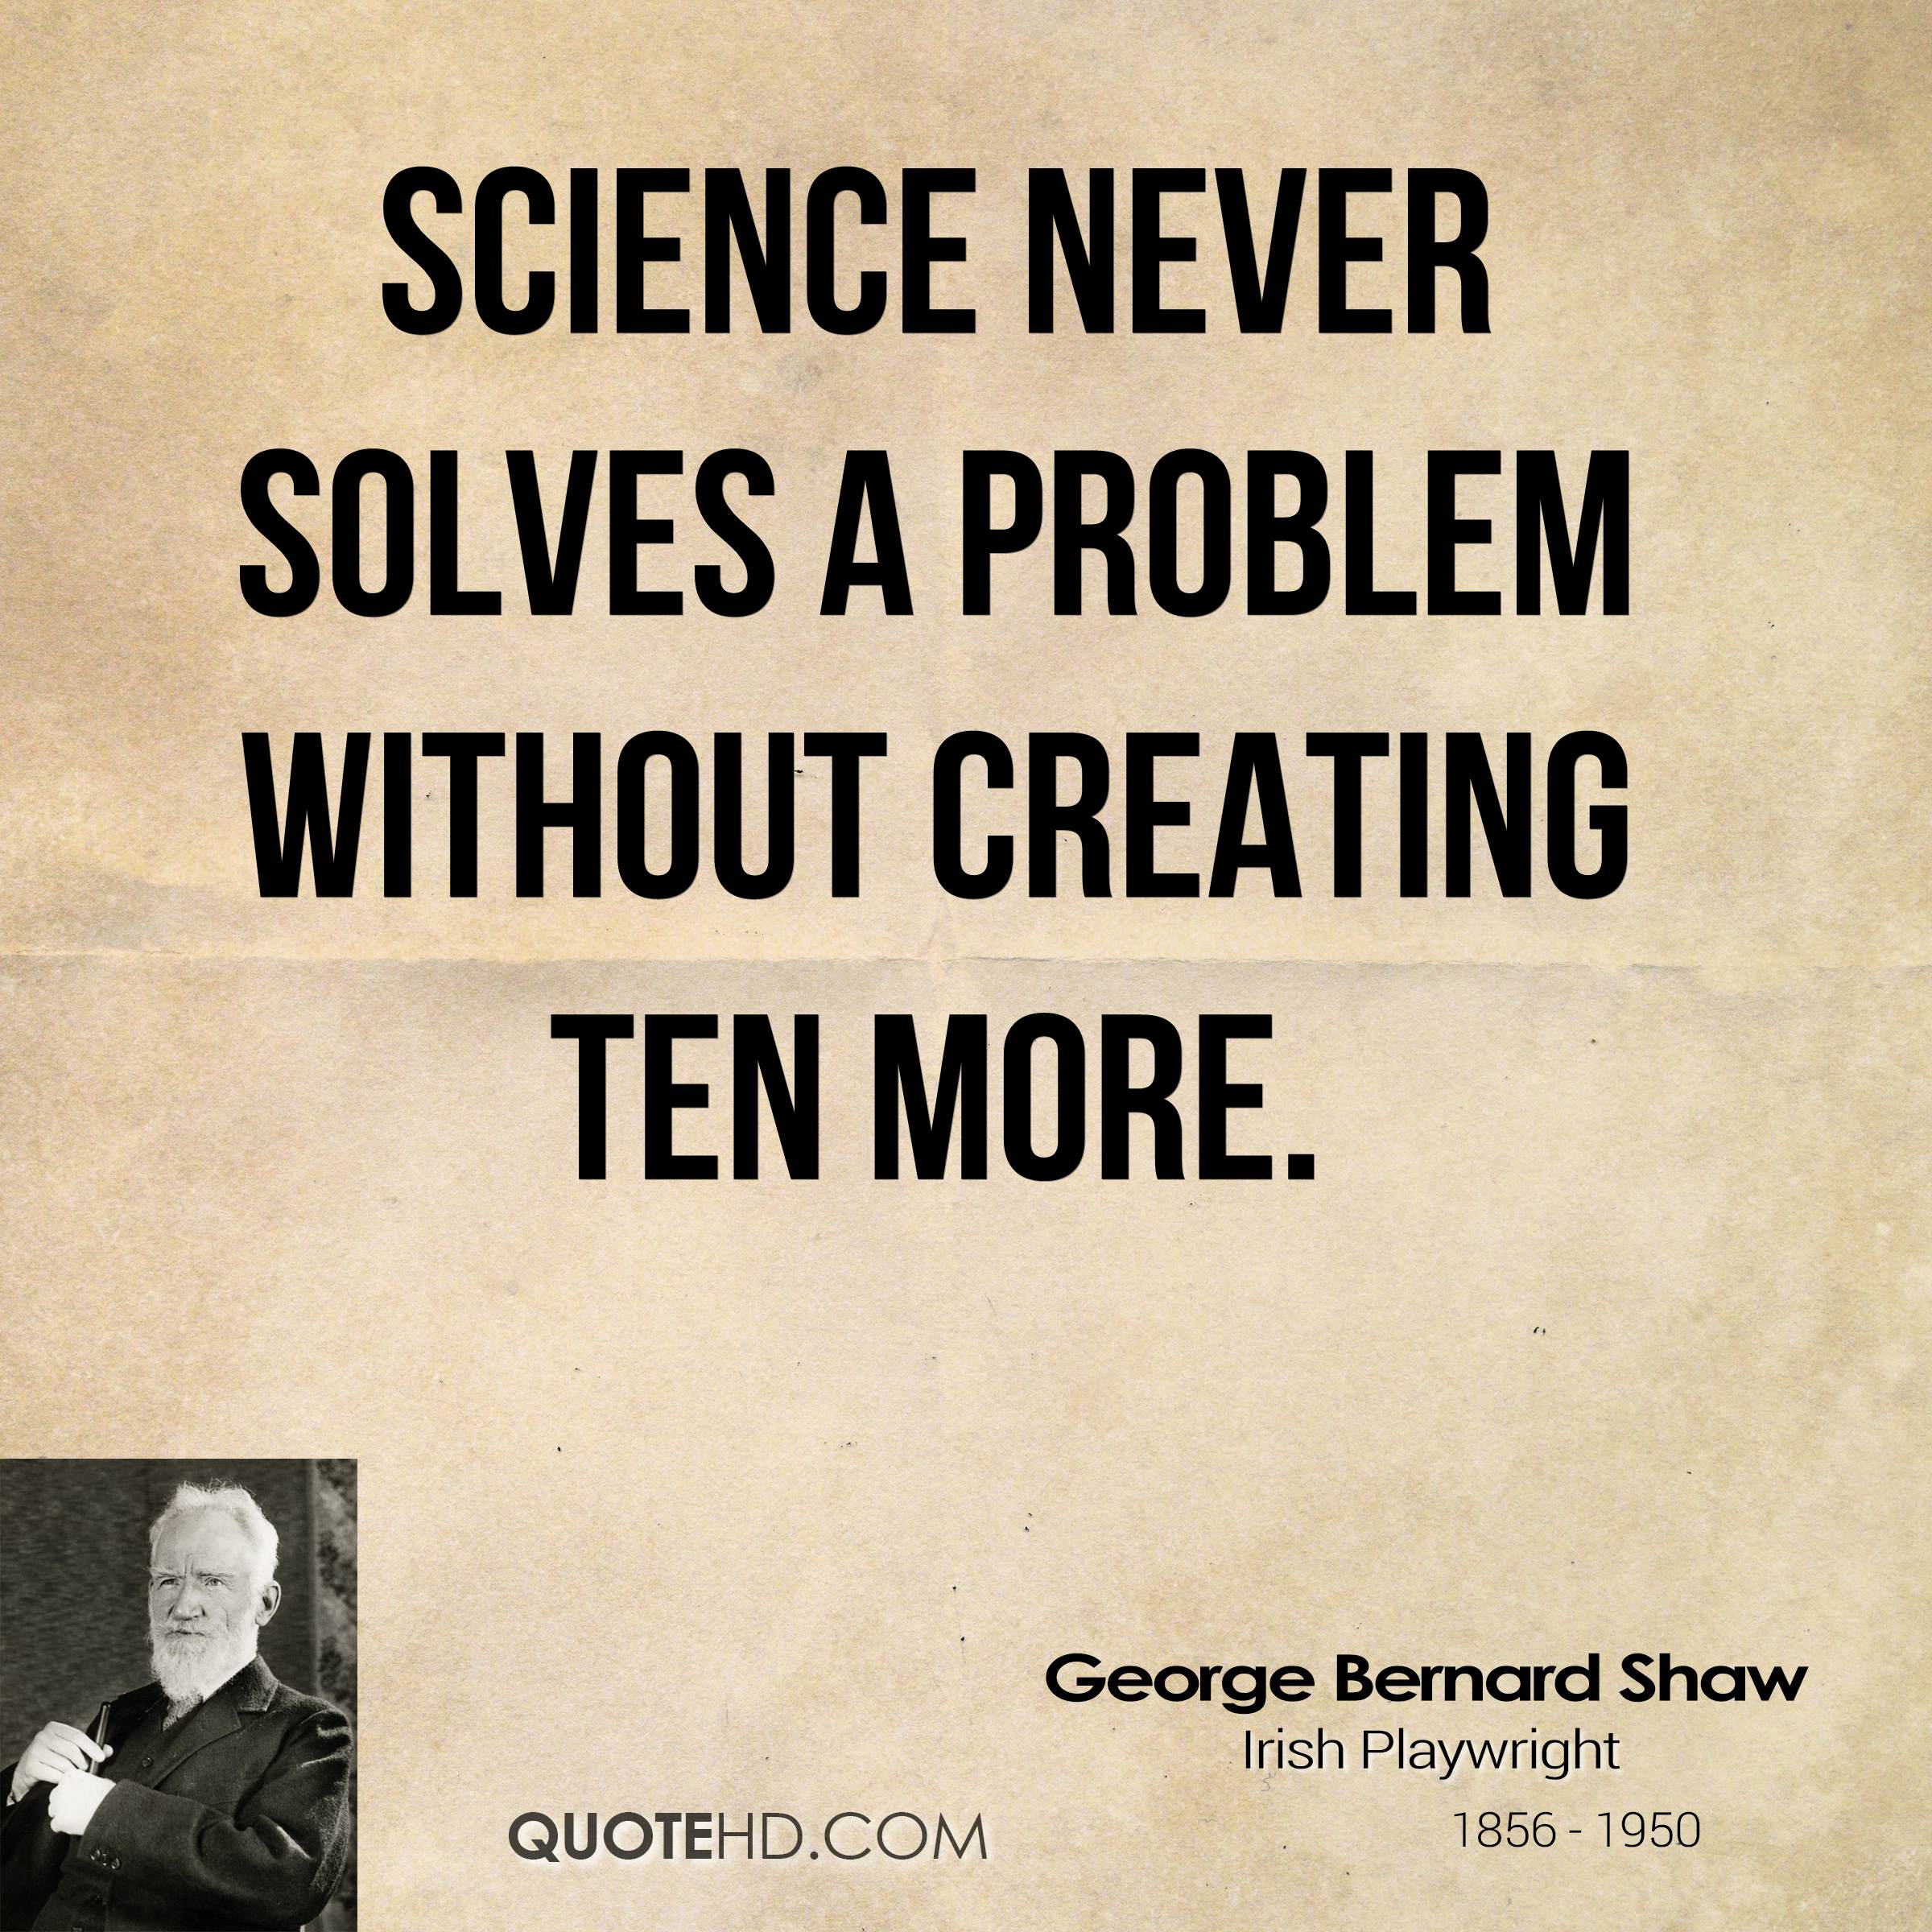 Science never solves a problem without creating ten more. george bernard shaw